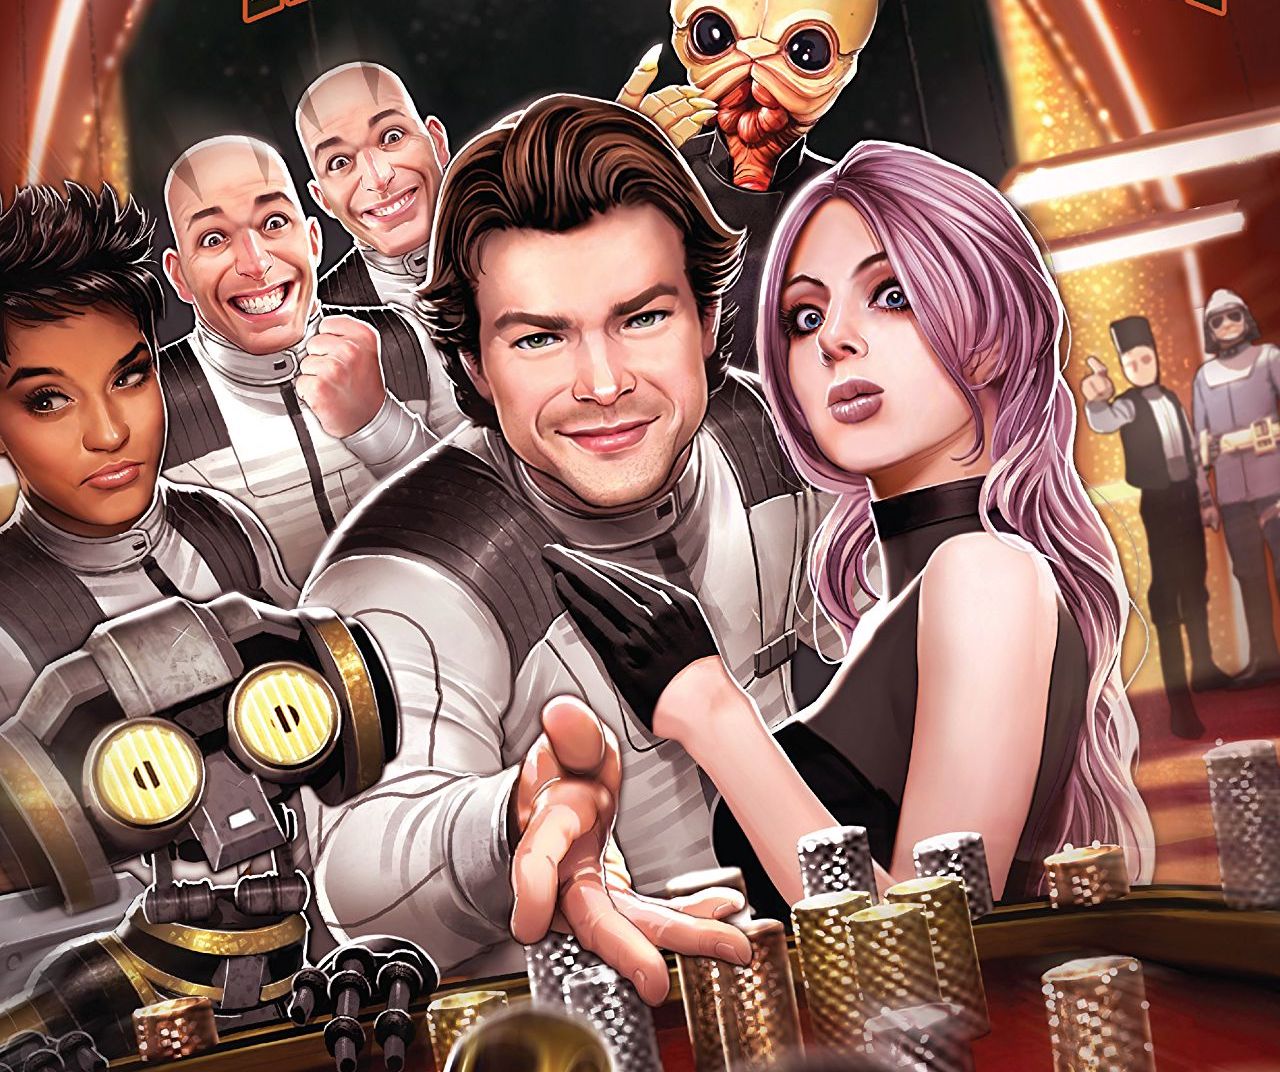 Star Wars: Han Solo - Imperial Cadet TPB review